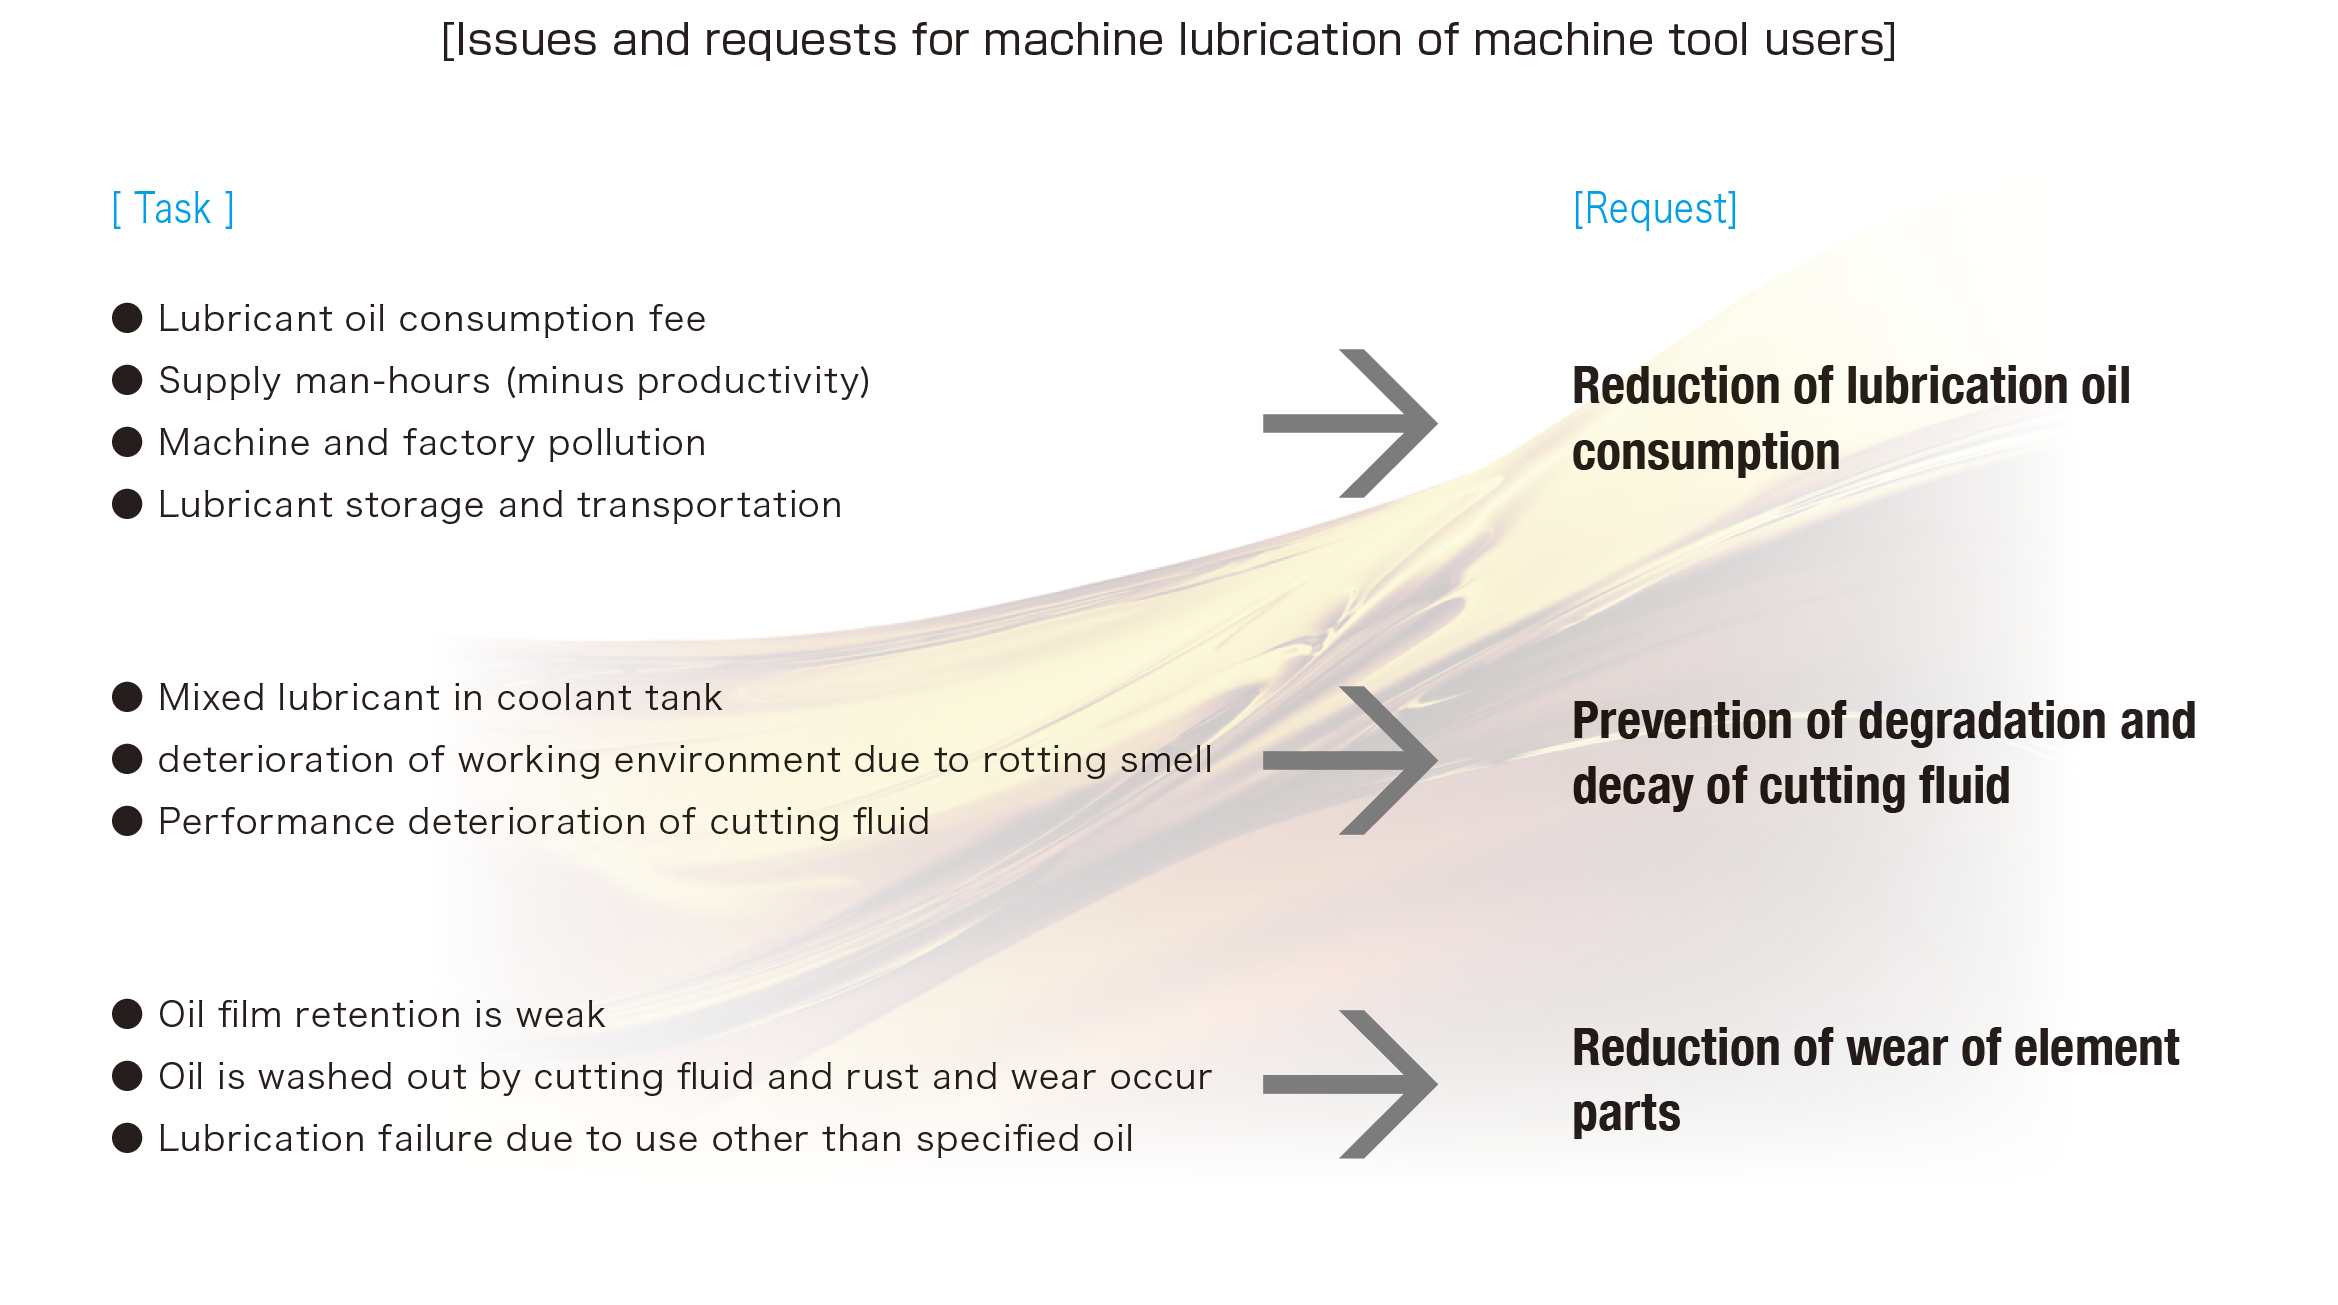 Issues and requests for oil lubrication owned by machine tool users 